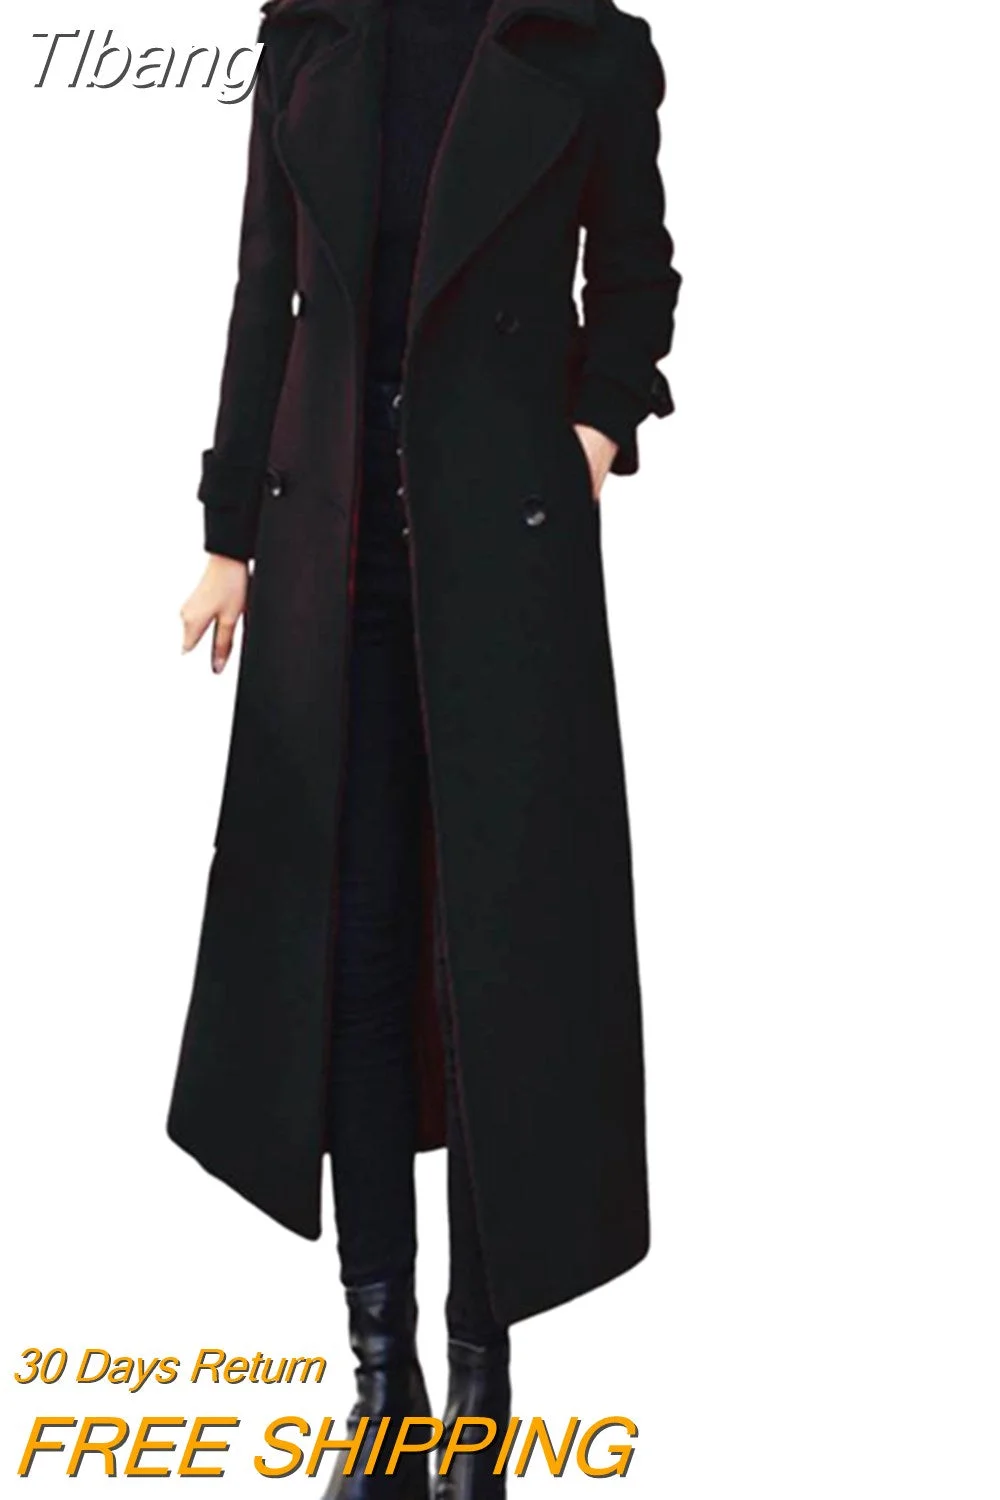 Tlbang Winter Overcoat Women Business Mid-calf Length Jacket Formal Wool Blends Double-breasted Coat Thick